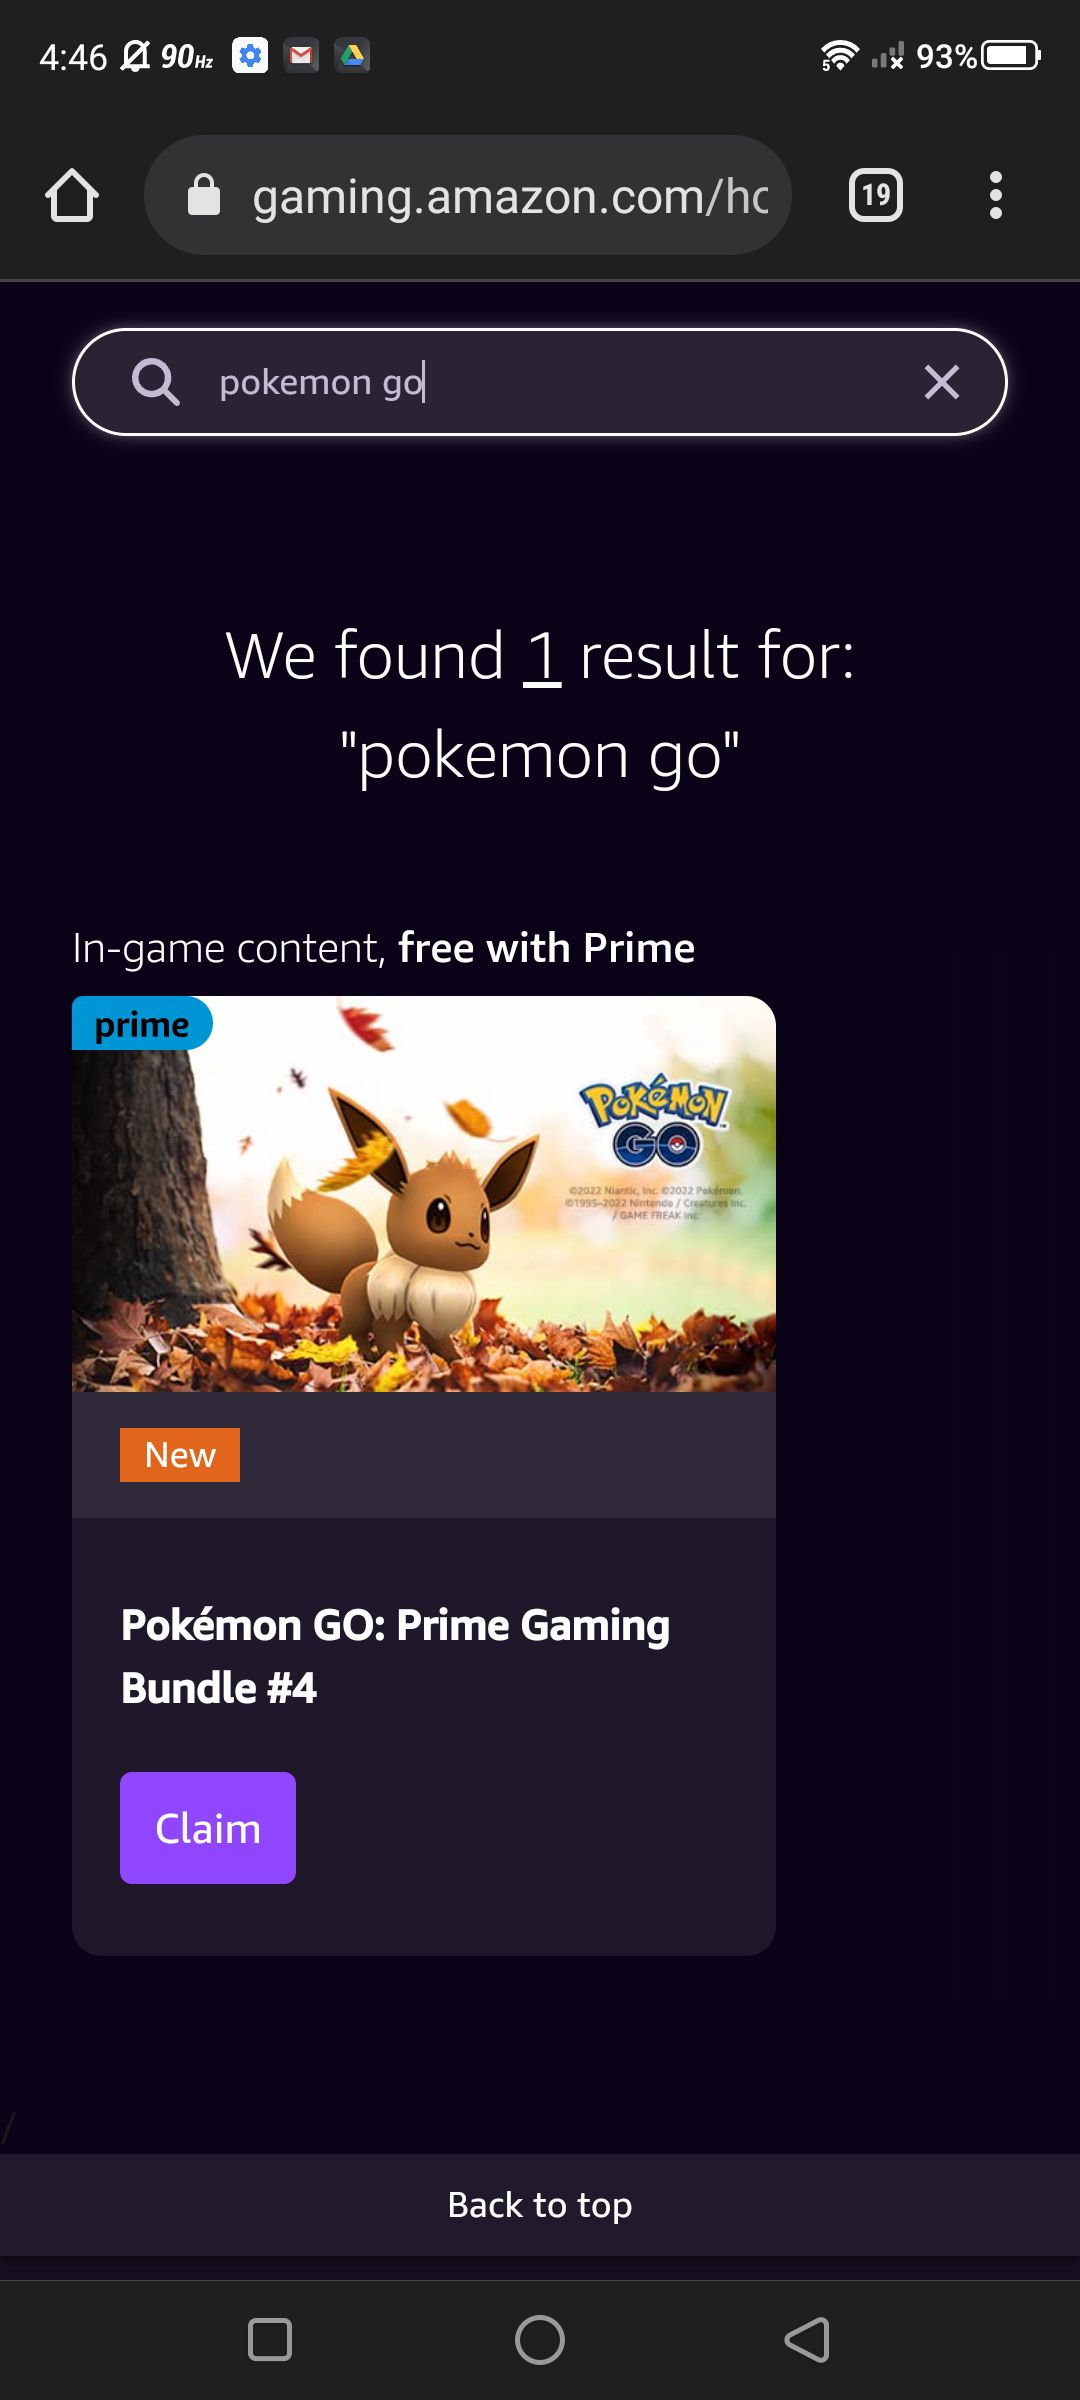 Screenshot of adding an entry in the search bar for Amazon Gaming (mobile web browser)